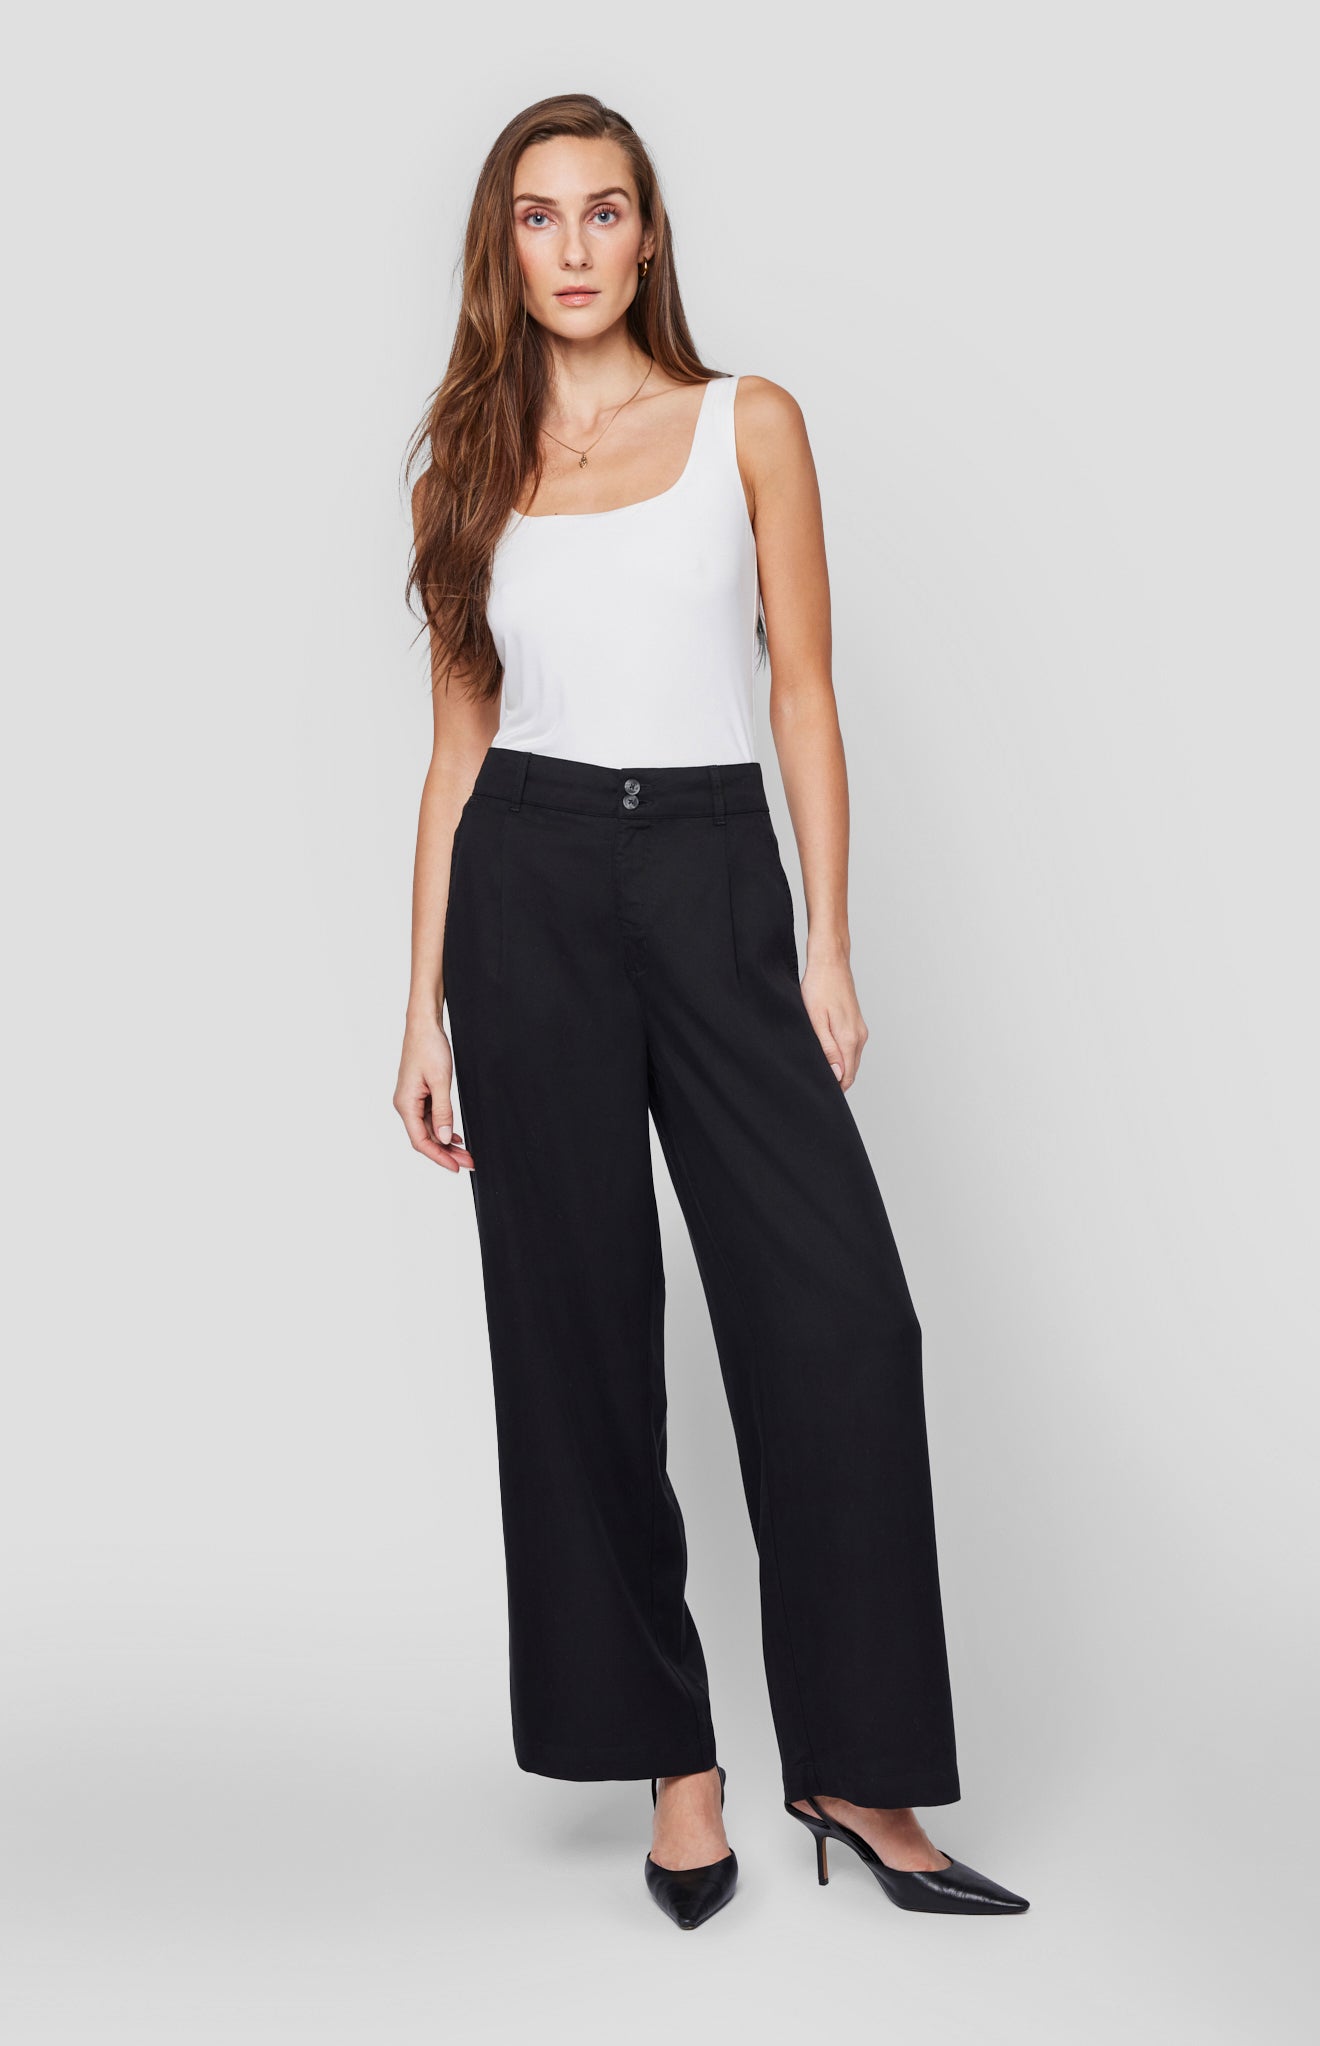 Gentle Fawn Pants GF2310-7306 'Hayes' Mid Rise Flare Leg 10'23